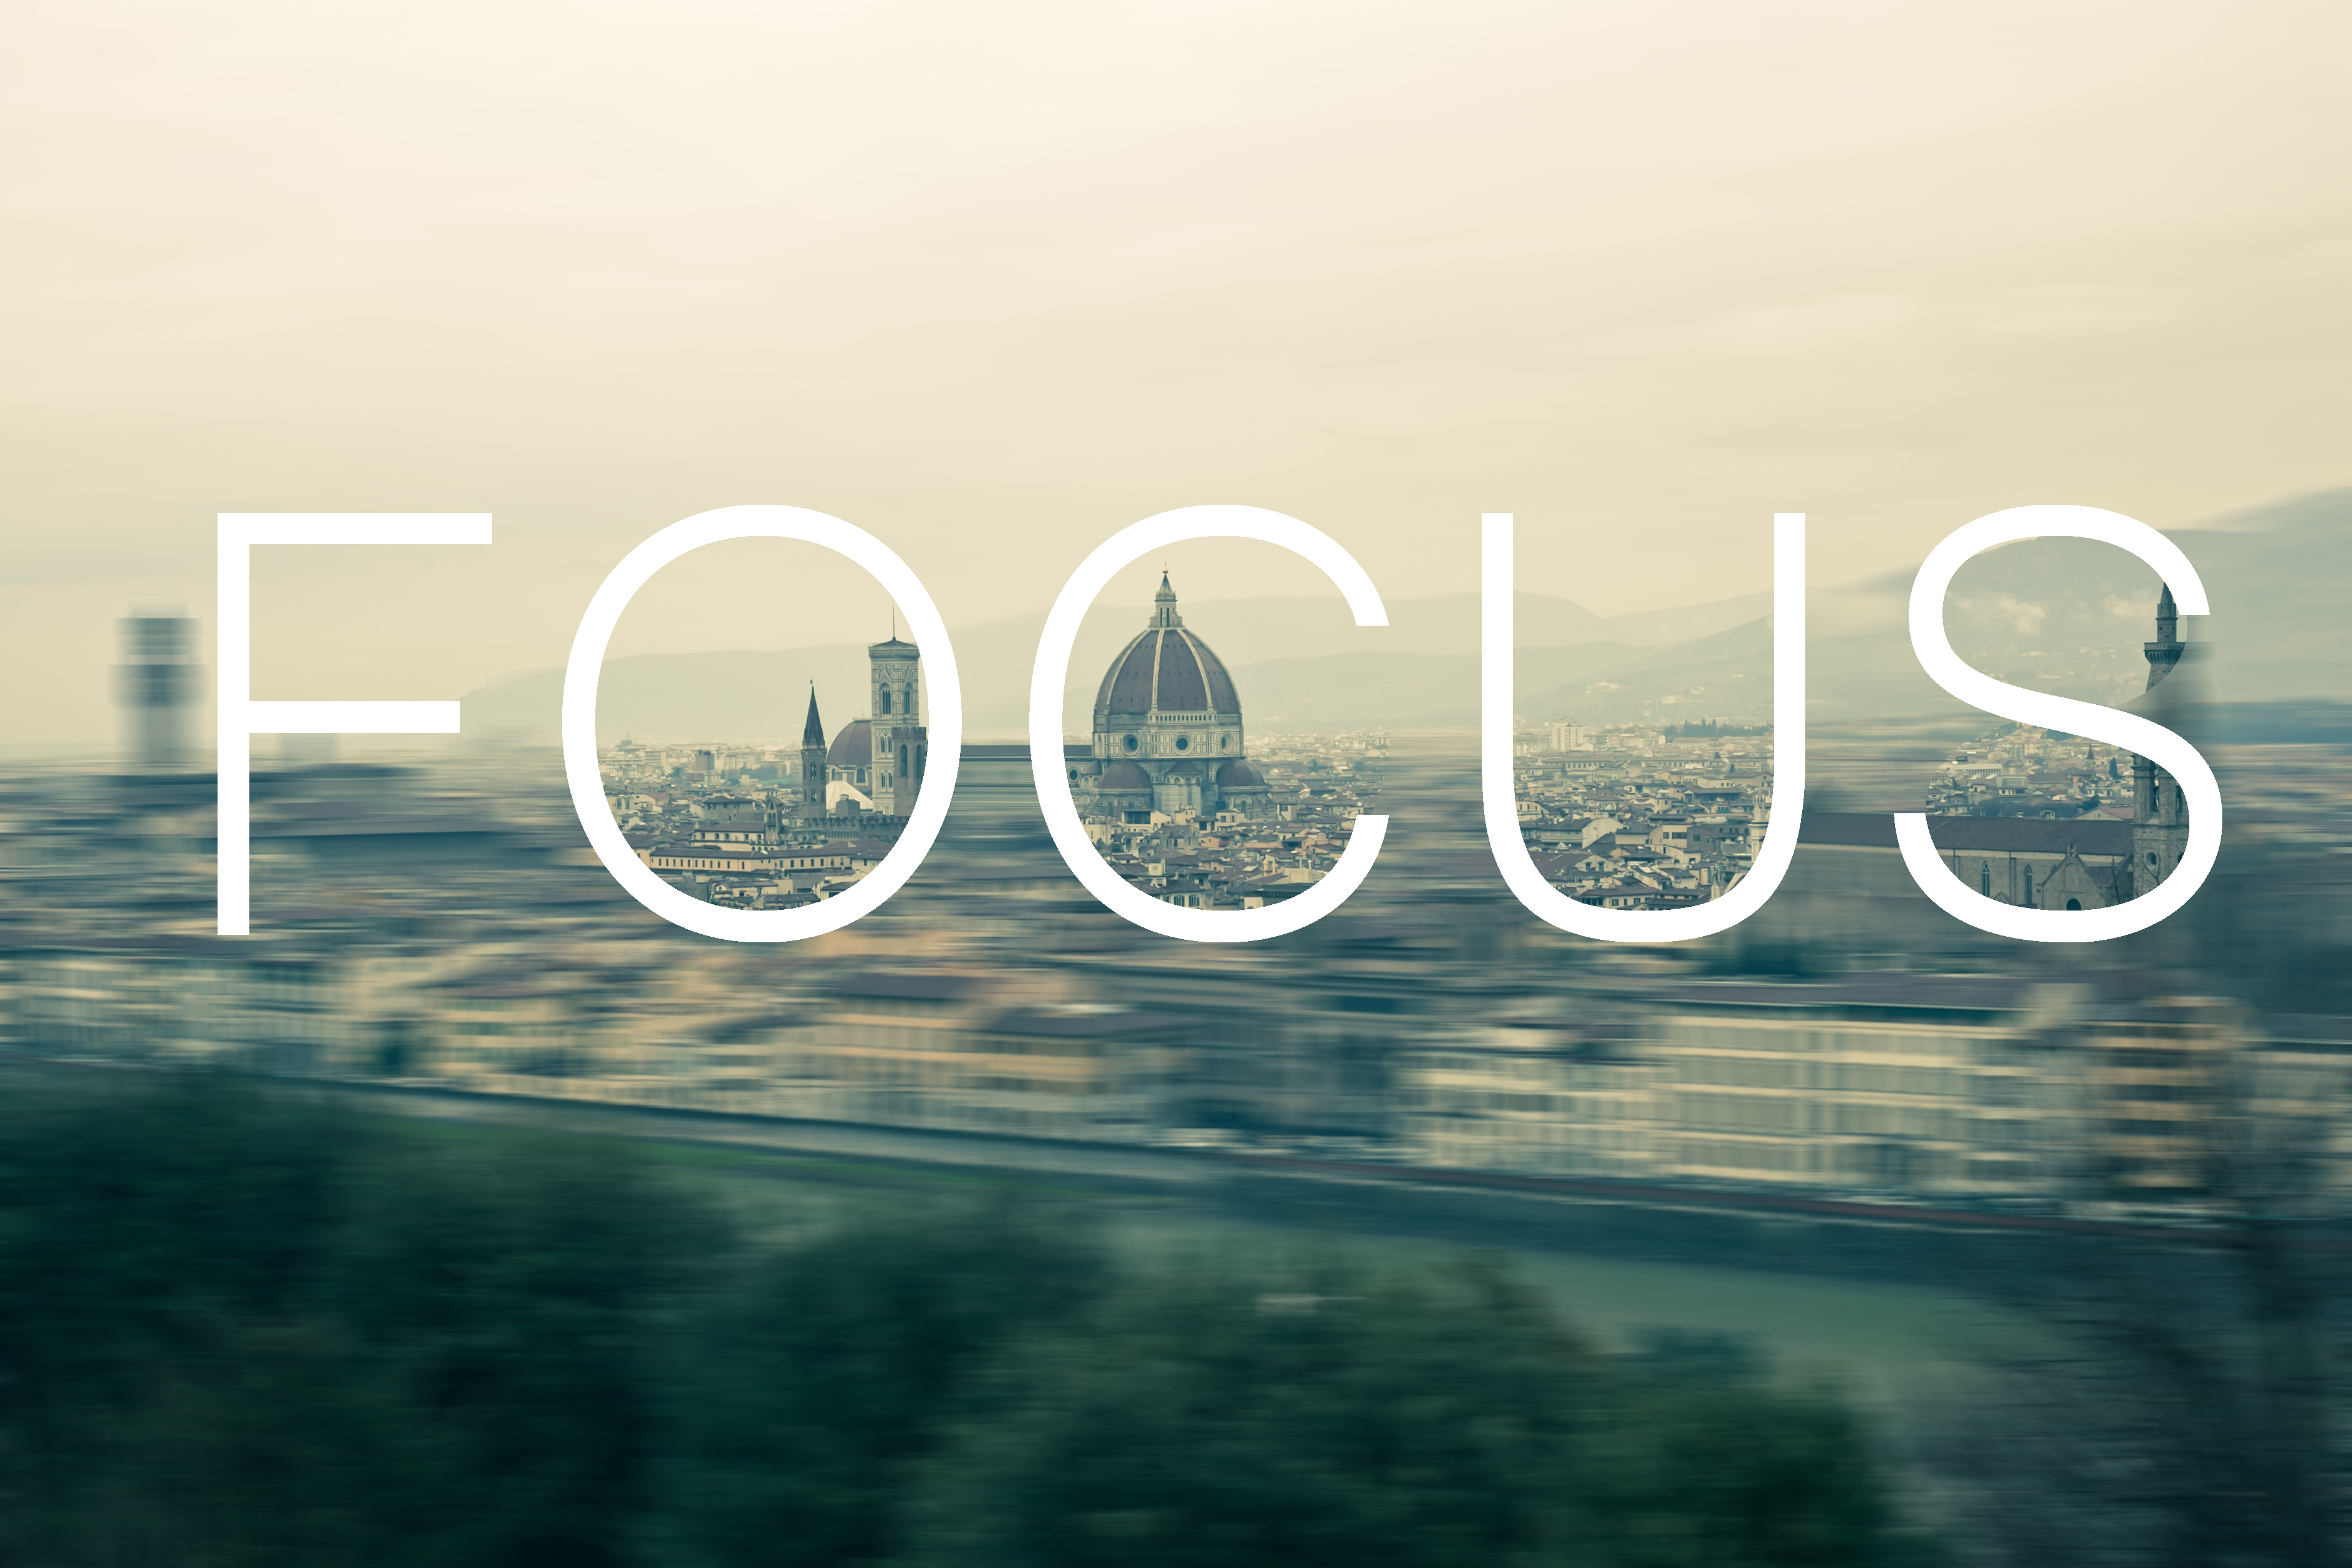 Focus wallpapers hd desktop backgrounds images and pictures